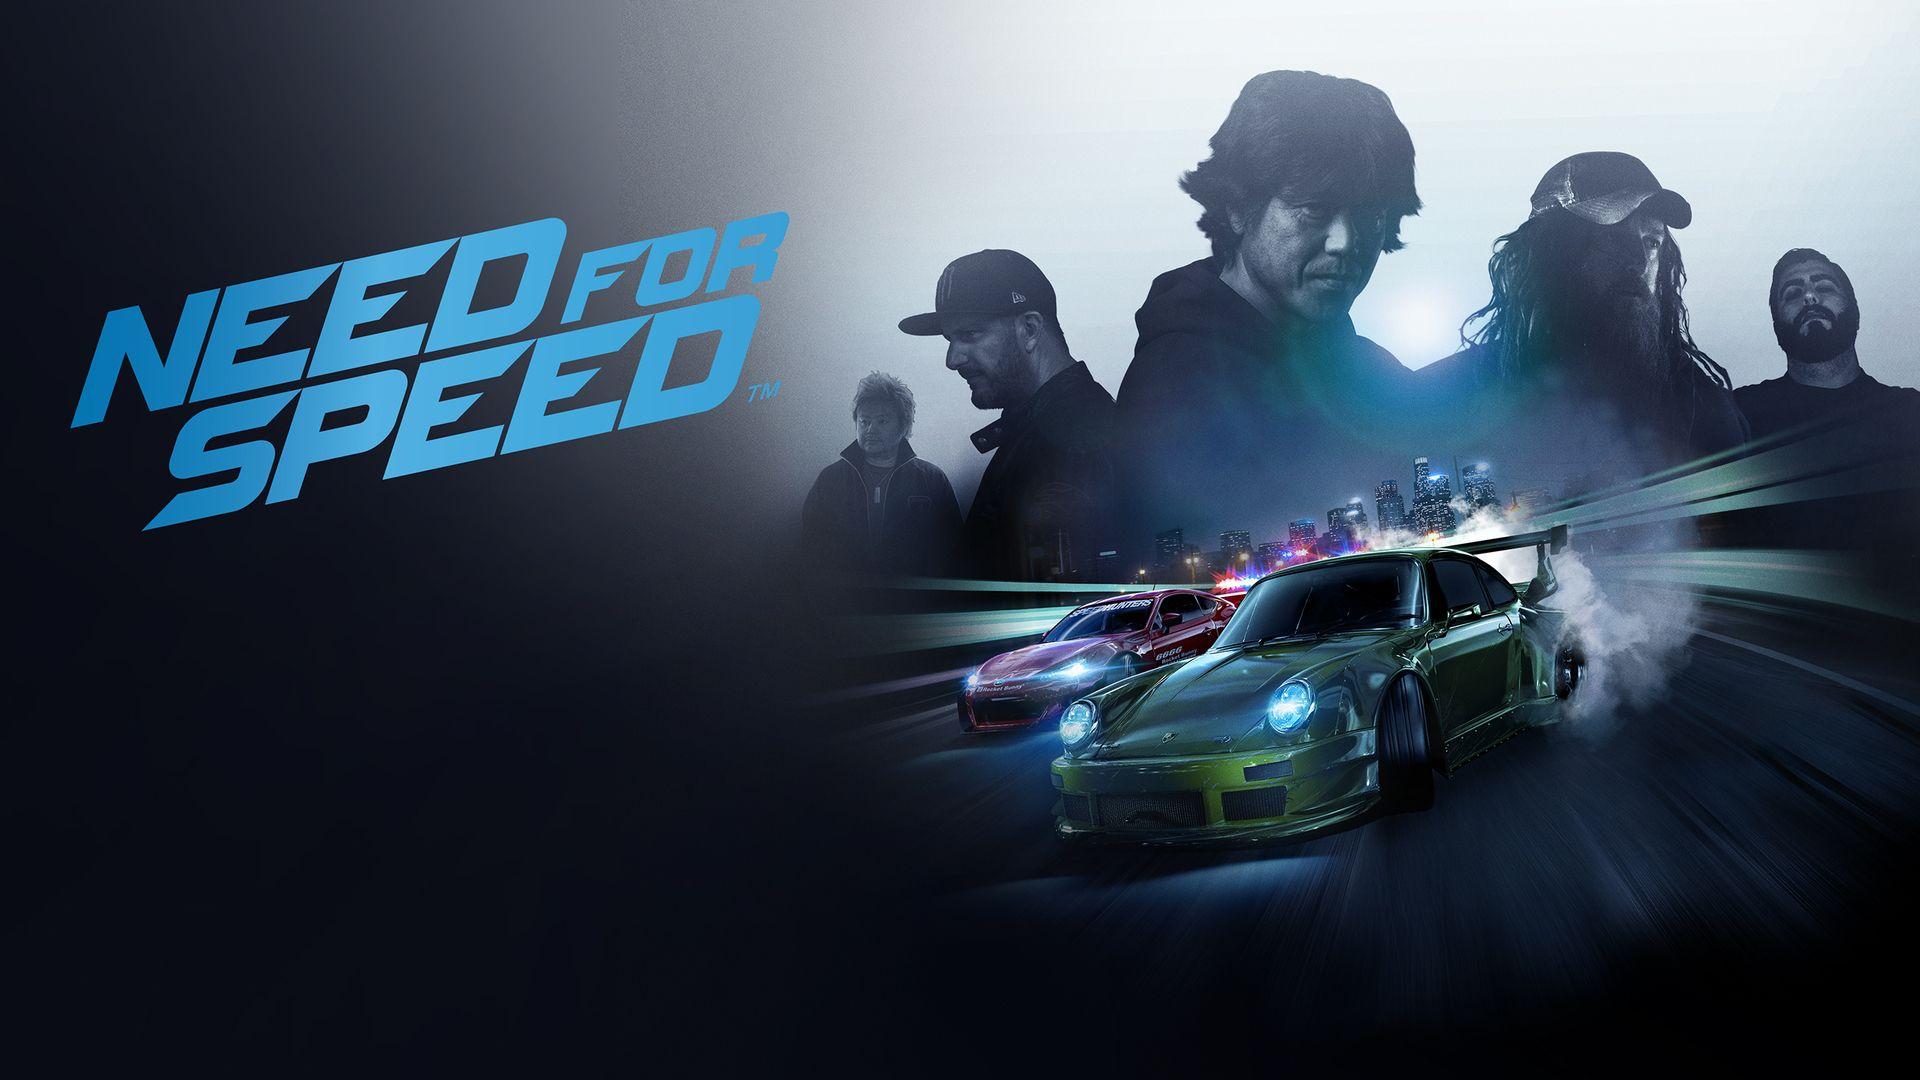 Logo gry Need for Speed z 2015 r. Wallpaper from Need for Speed